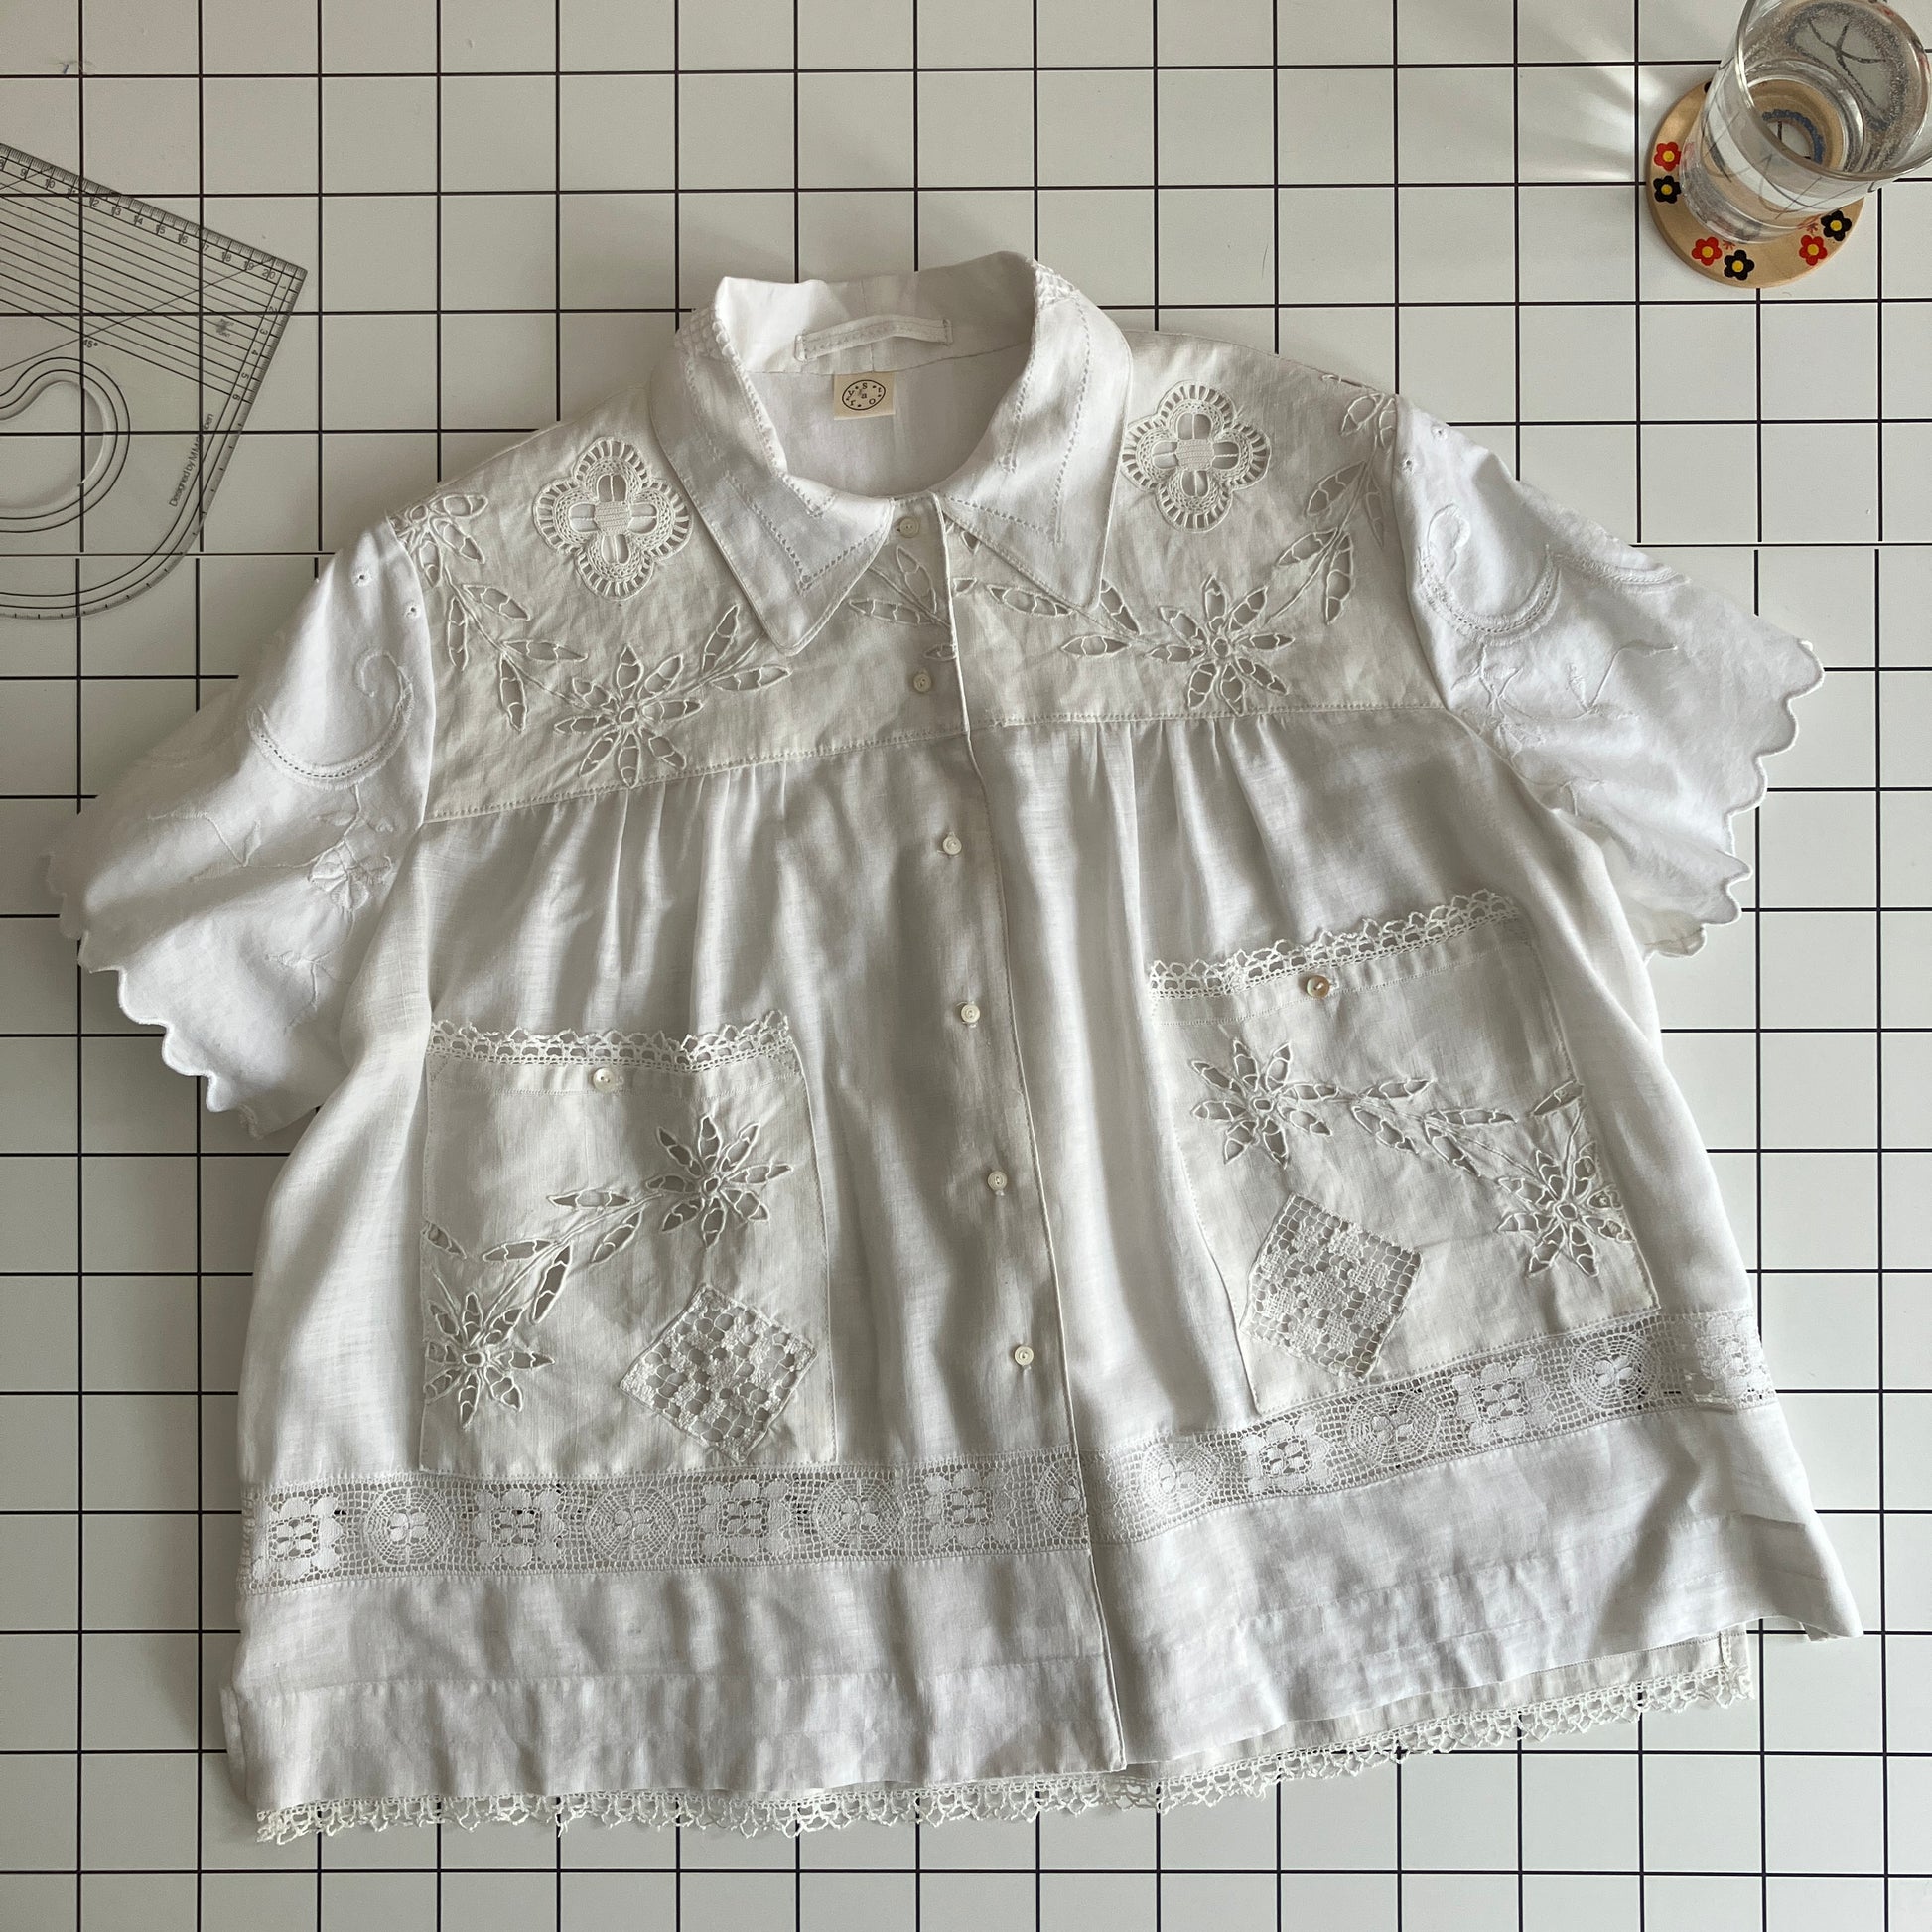 Short-sleeved, swingy shirt made from vintage cutwork linen and cotton cutwork table and tray cloths.